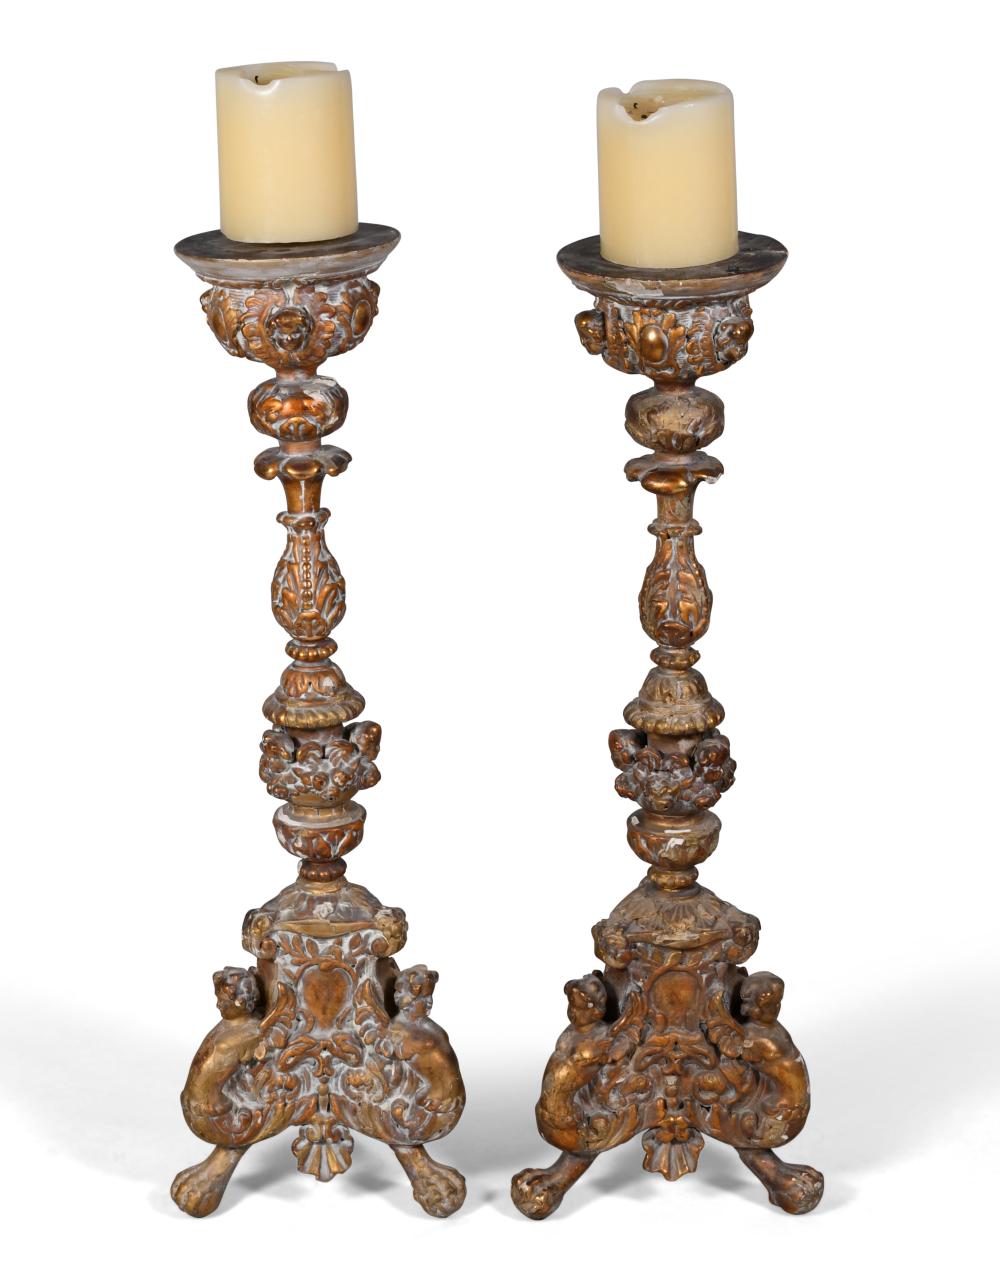 PAIR OF CONTINENTAL GILTWOOD ALTAR